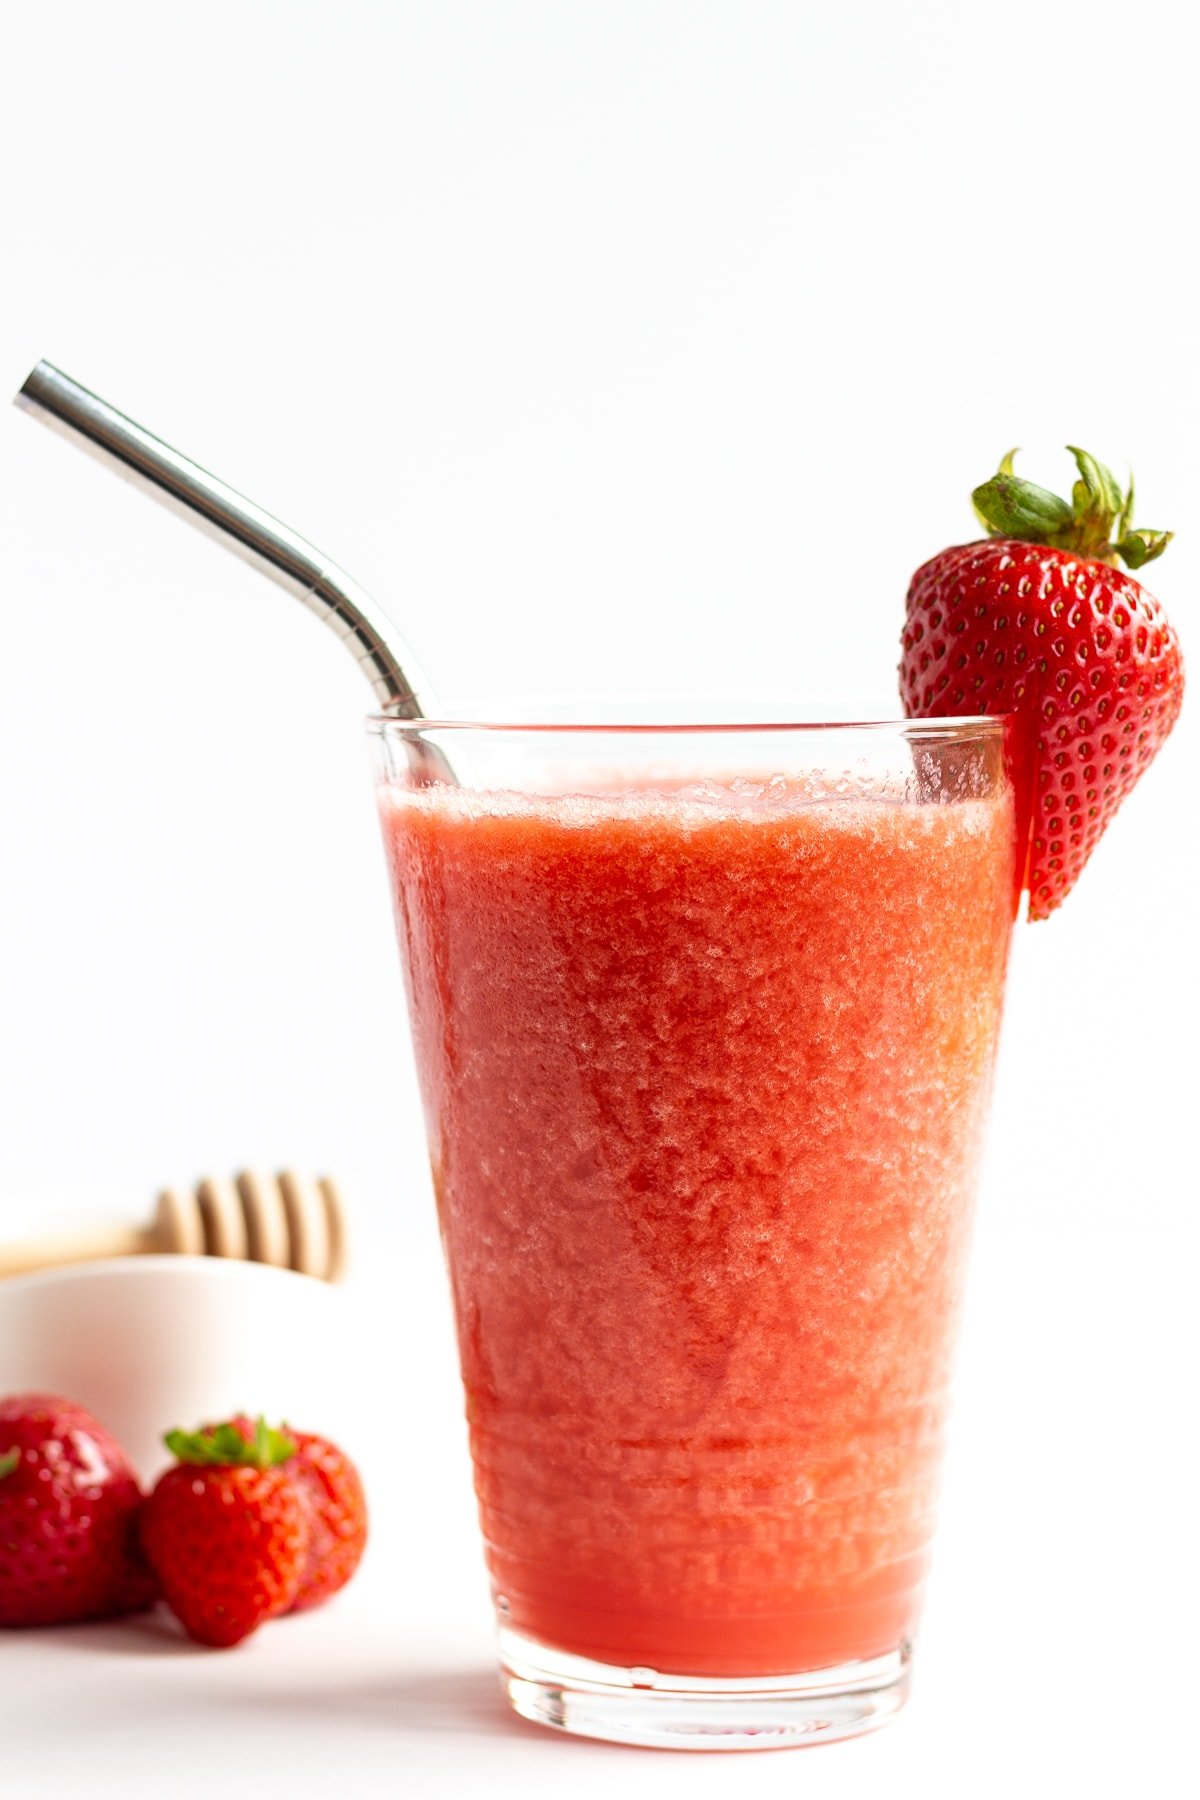 Glass of strawberry slushie garnished with a strawberry and stainless steel straw.